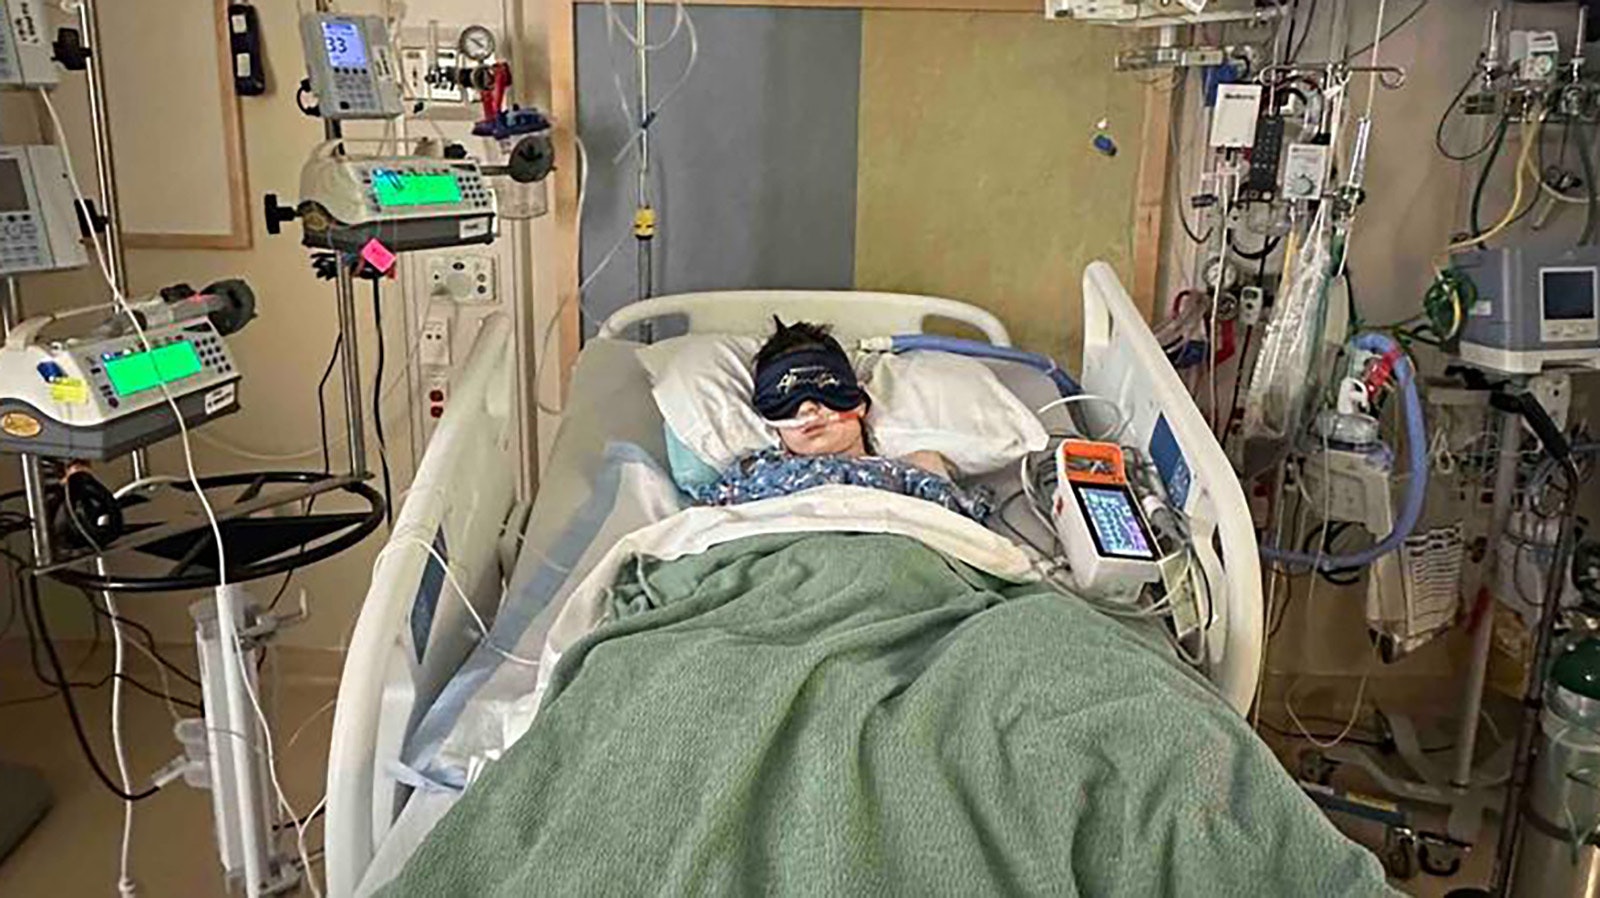 Wyatt Morgan, 8, in a hospital bed as his body fights a serious condition that had fluid filling his lungs and putting pressure on his heart.